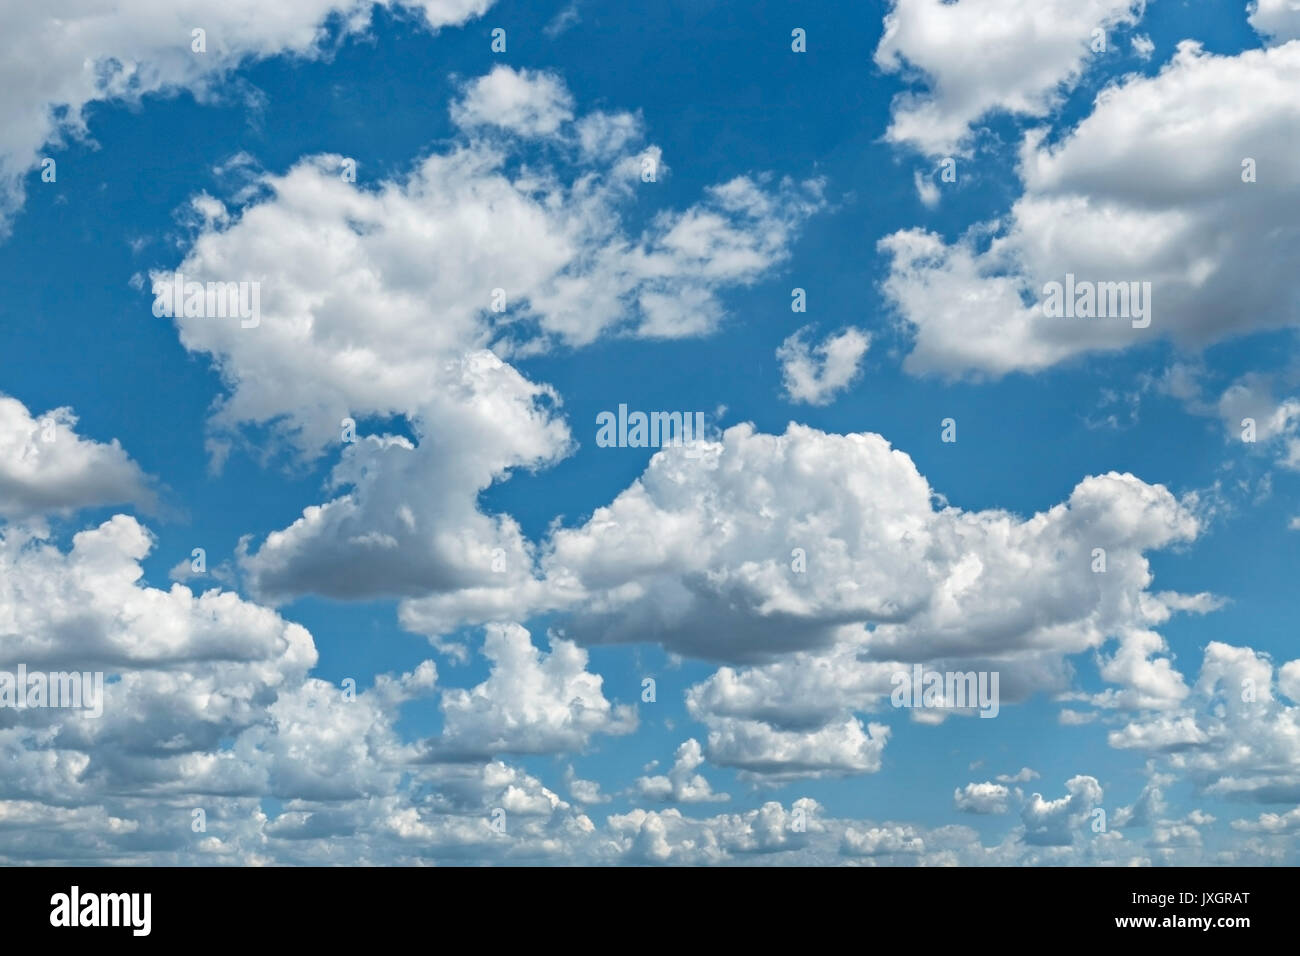 Blue sky with clouds background Stock Photo